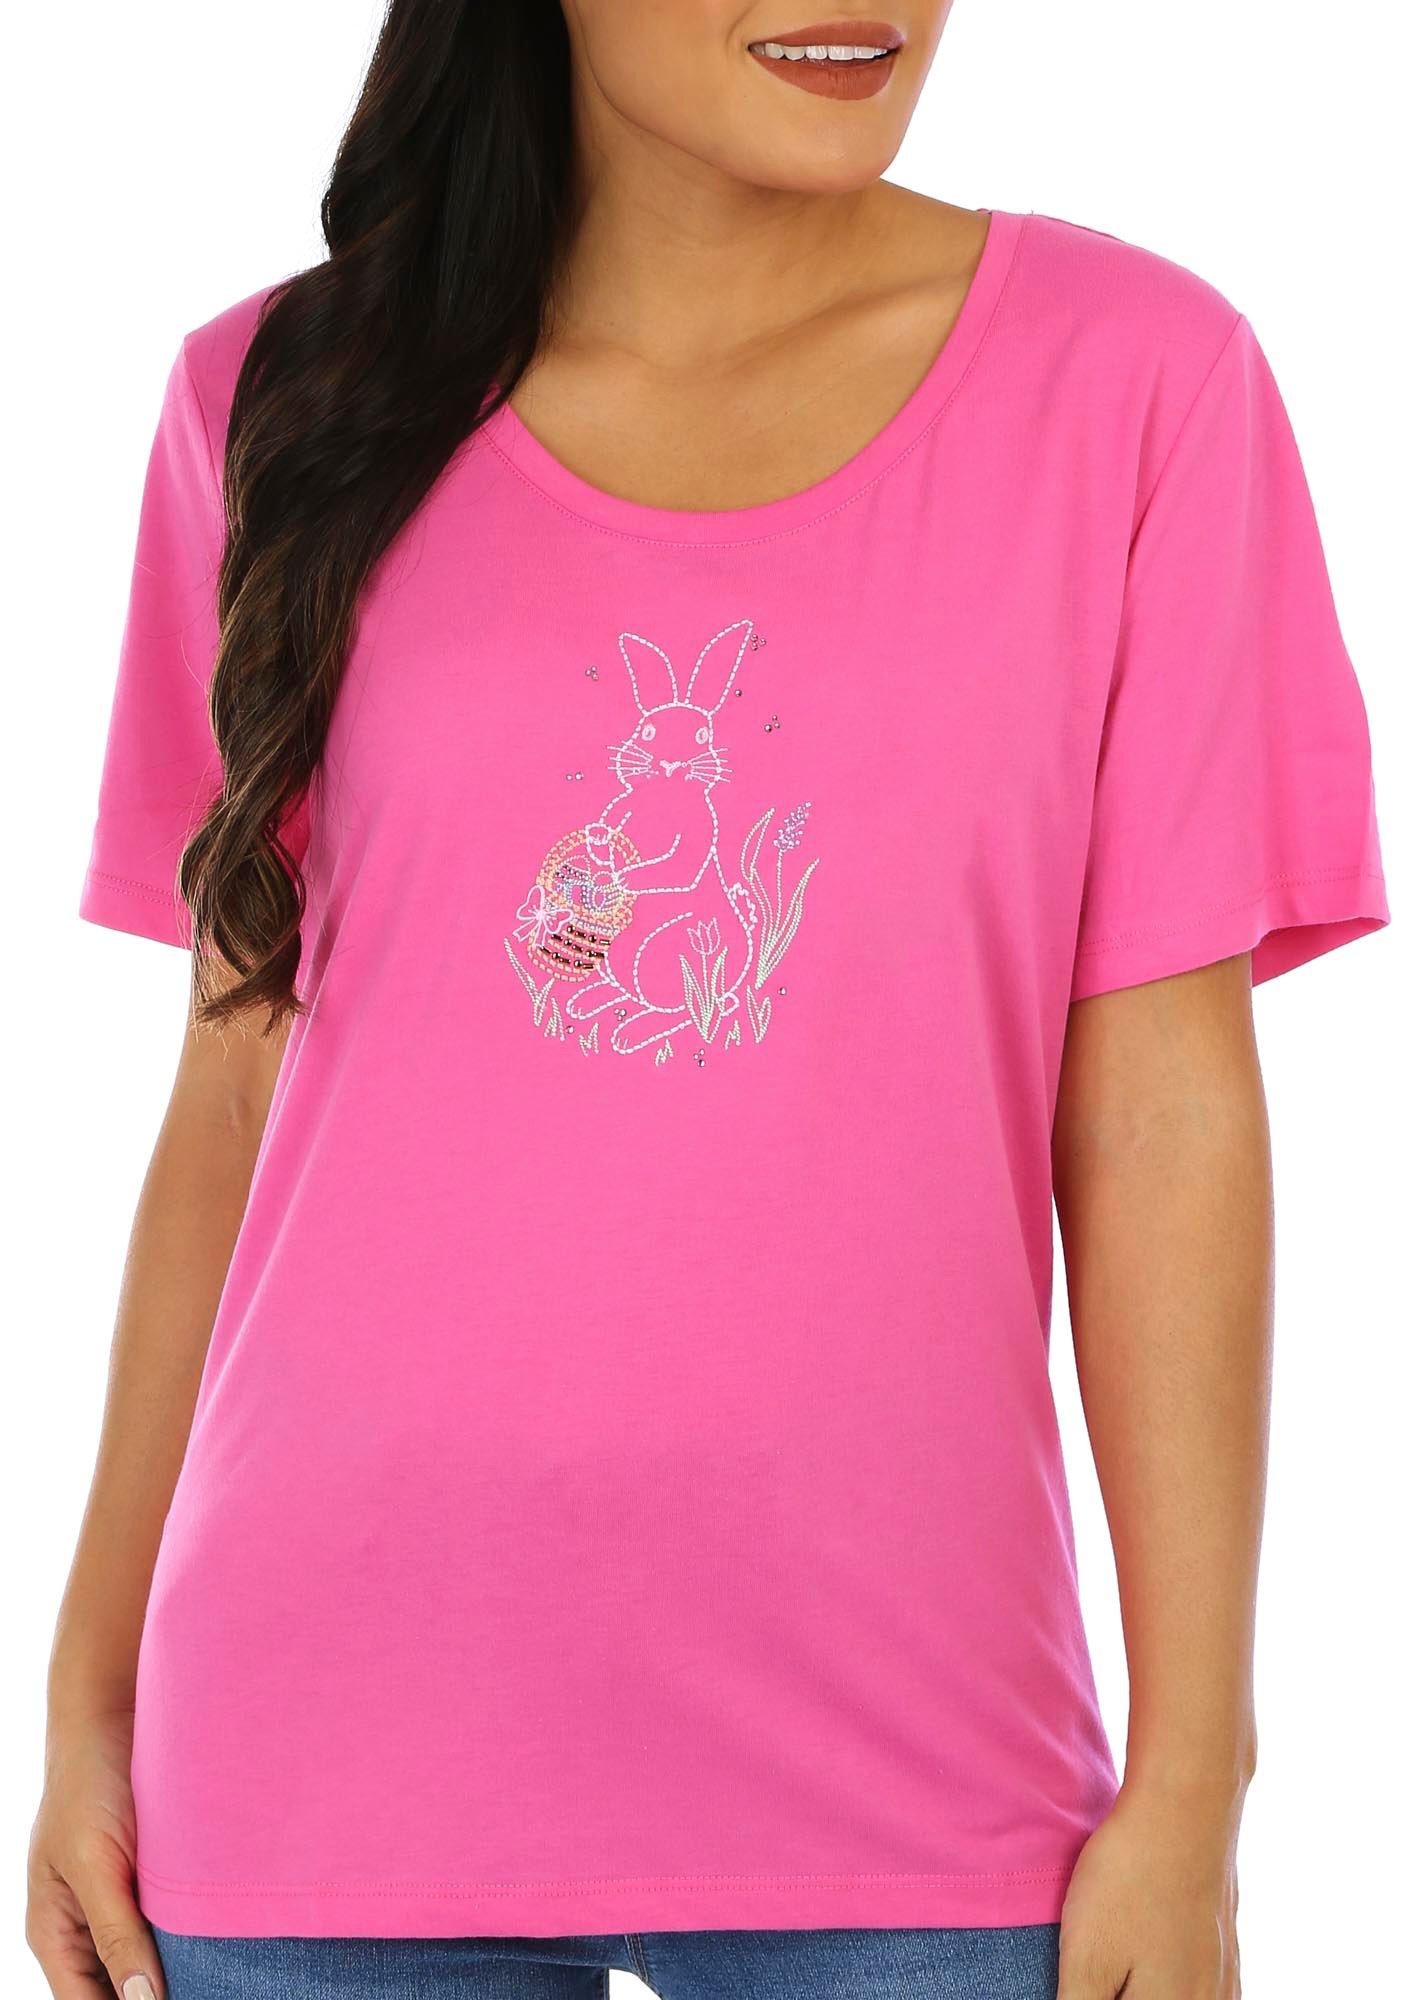 Coral Bay Petite Embroidered Easter Bunny Short Sleeve